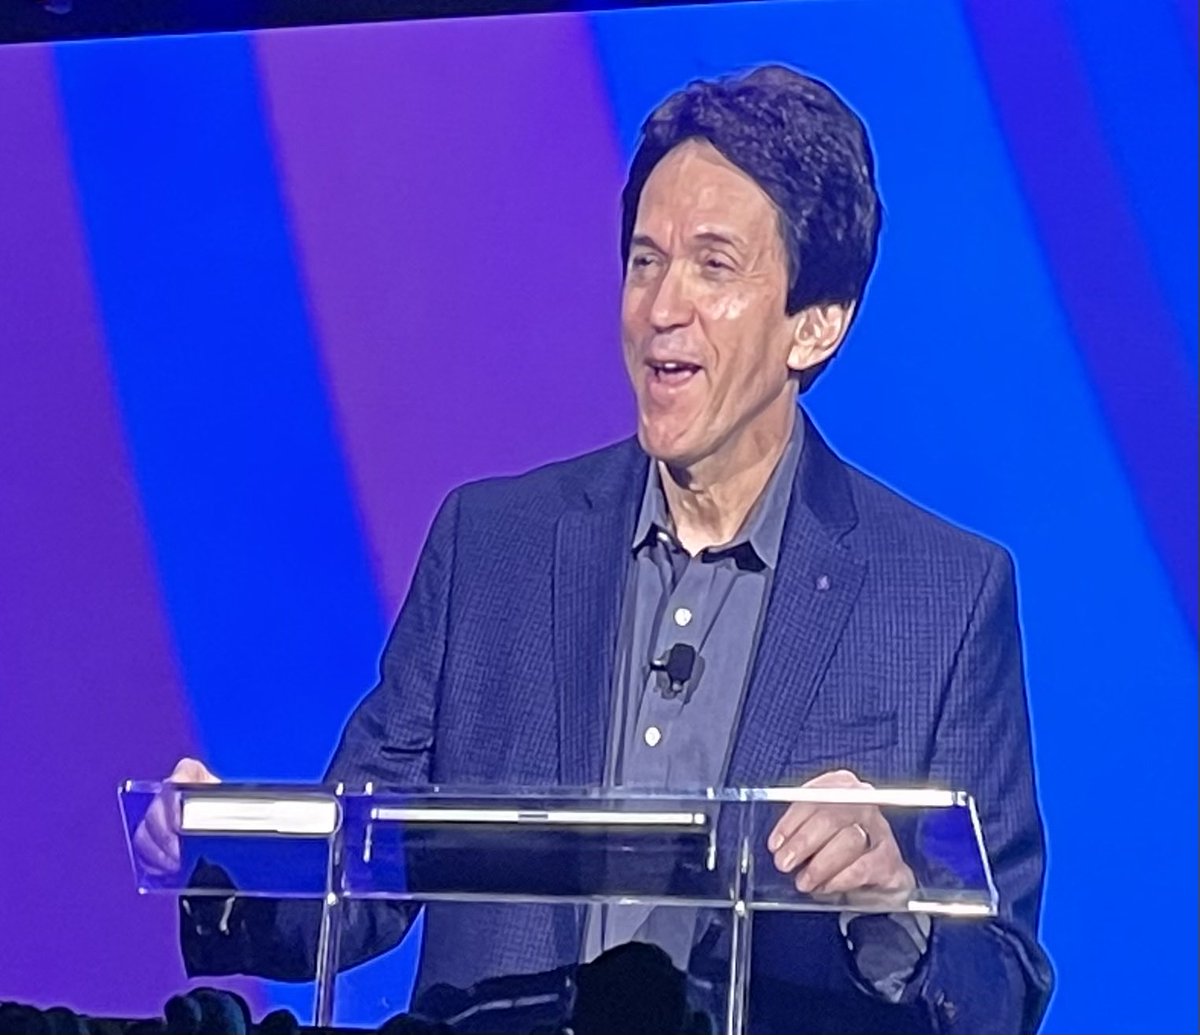 #SHRM23 keynote @MitchAlbom 

How often do we ask for help? 

#DriveChange #InTheLifeboat #SHRM75